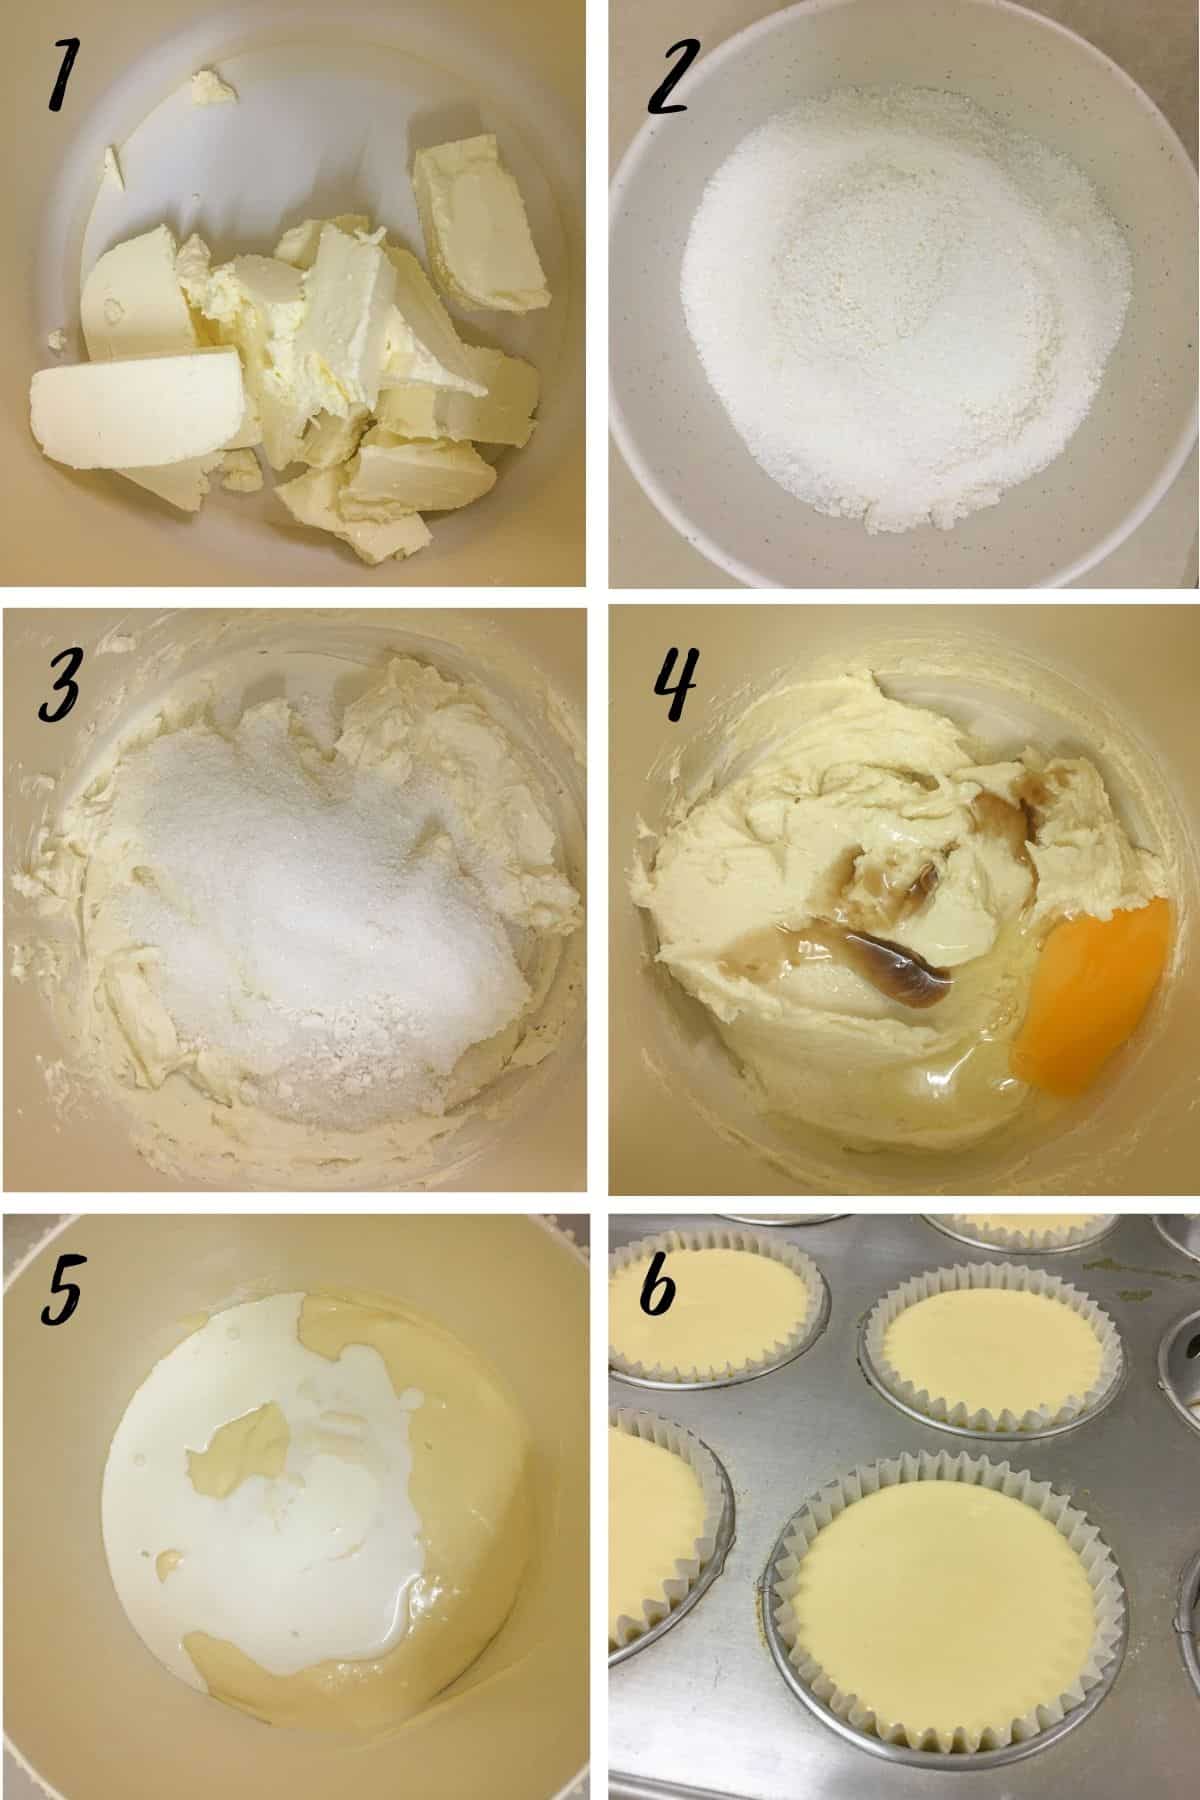 A poster of 6 images showing how to make cheesecake batter.